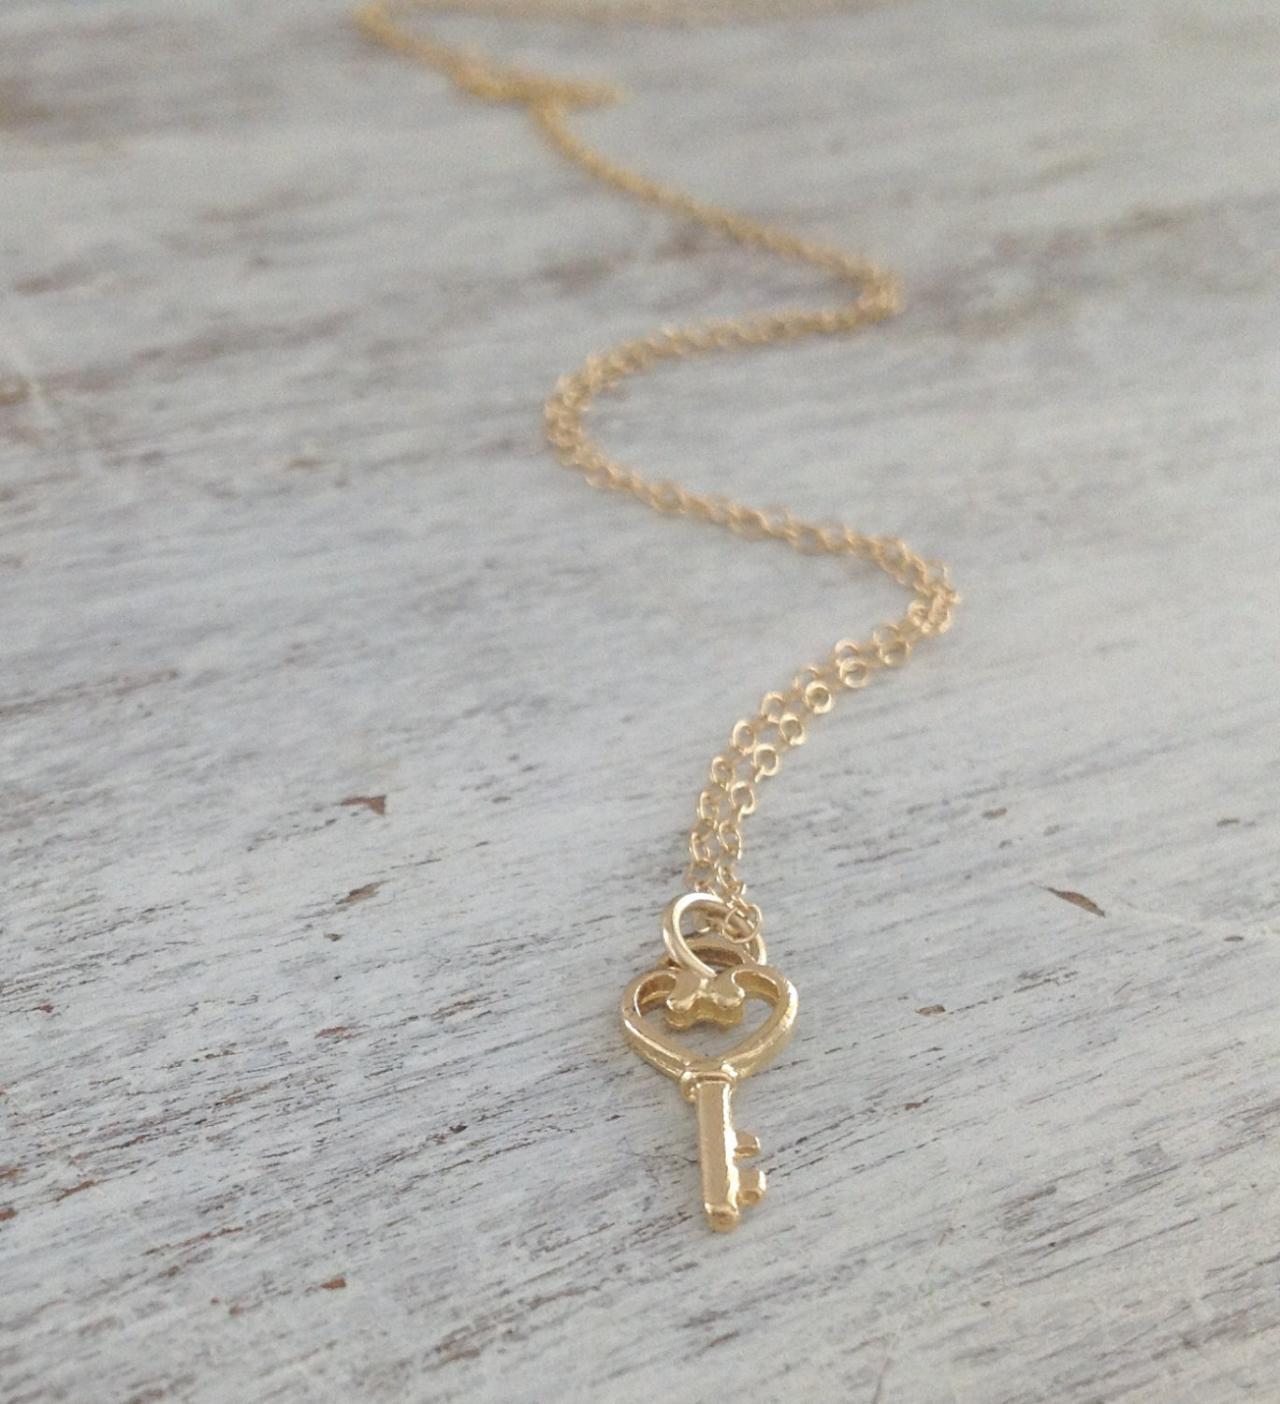 Gold Necklace, Heart Key Necklace, Tiny Gold Necklace, Simple Necklace, Dainty Necklace, Key Necklace, 1simple Everyday 021